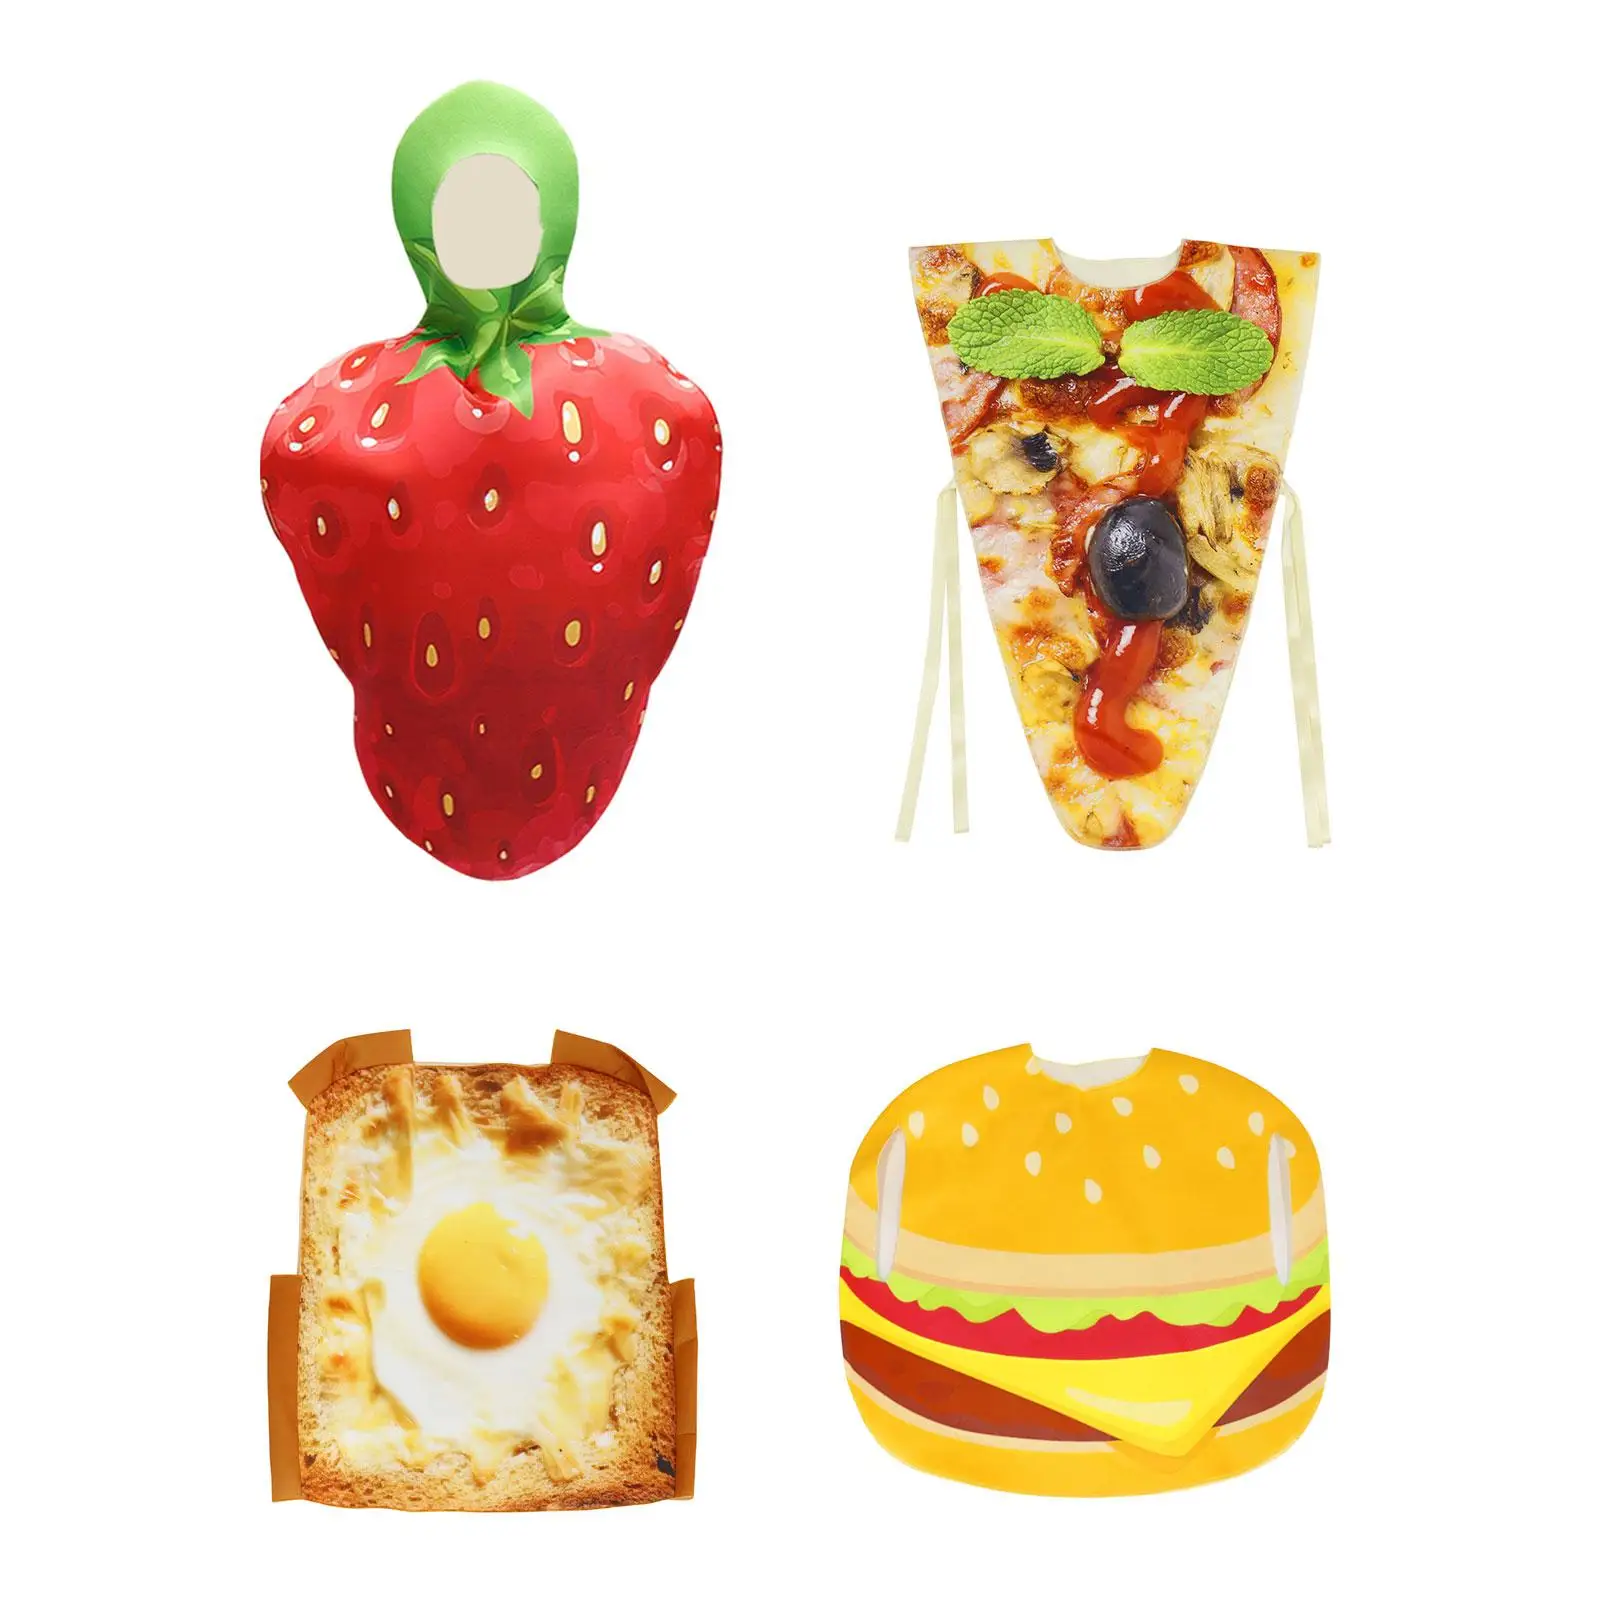 

Food Cosplay Costume Reusable Funny Props Dress up Jumpsuit Outfit for Show Carnival Themed Party Stage Performance Role Playing